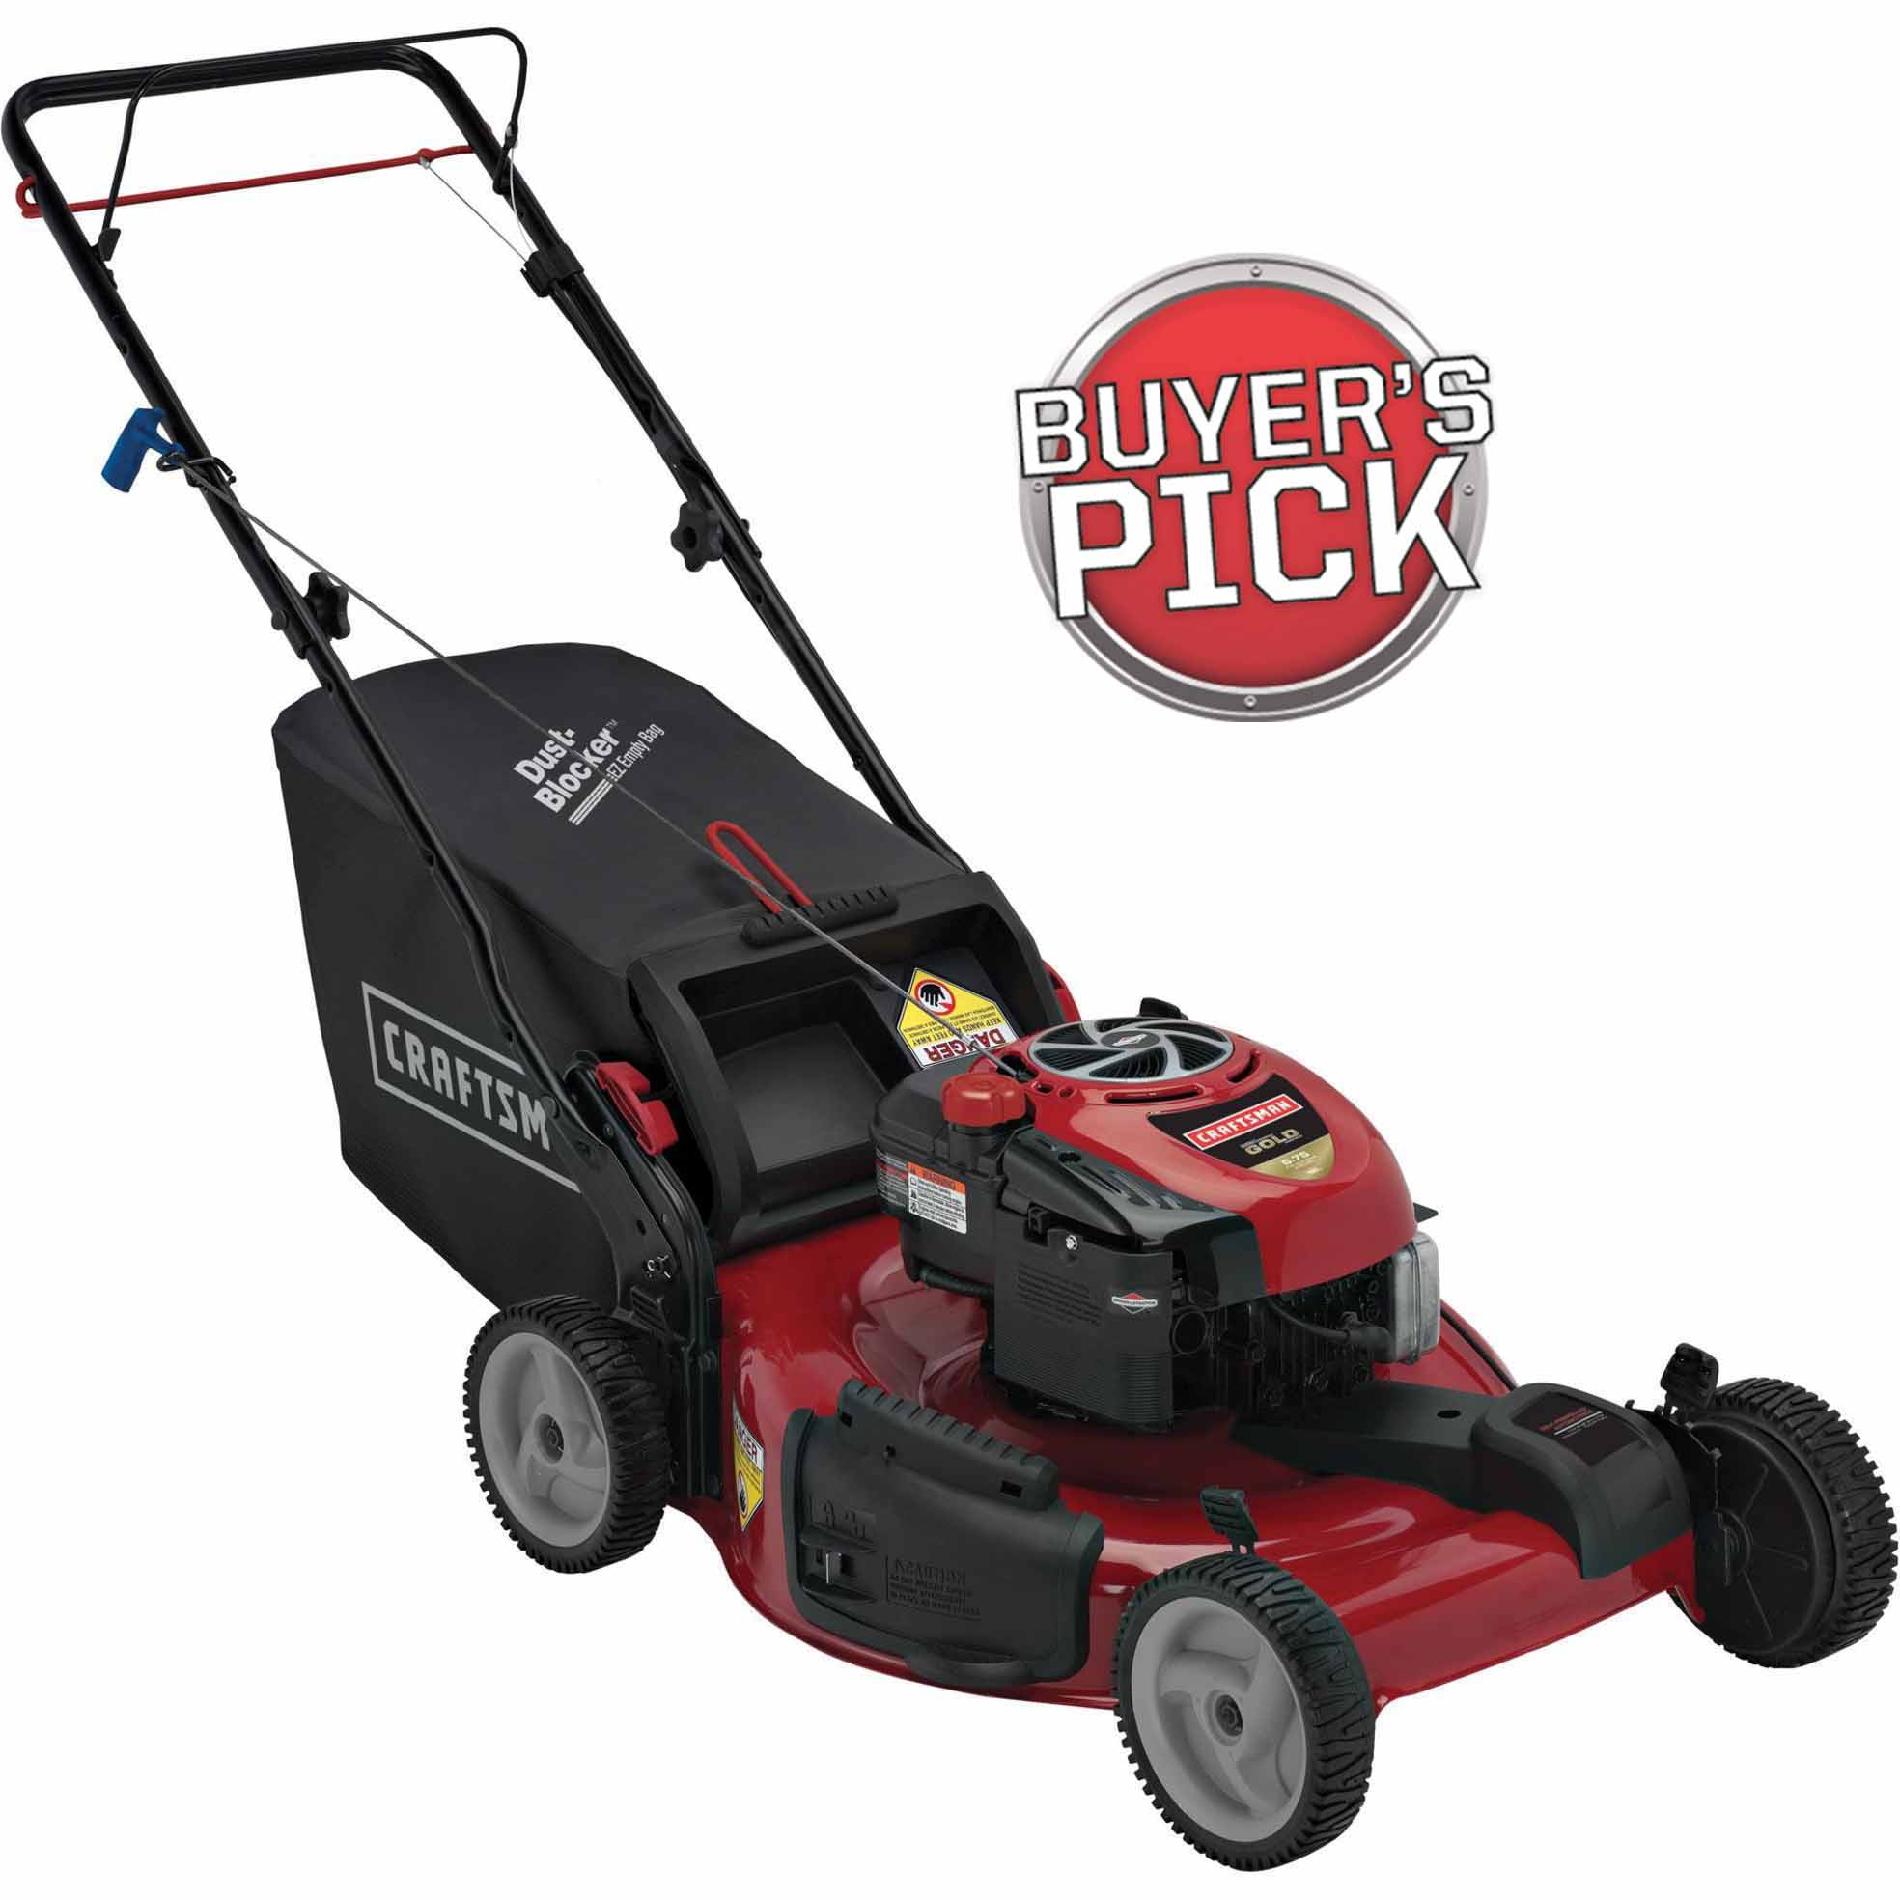 Craftsman 190cc Self-Propelled Mower: No-Hassle Mowers At Sears